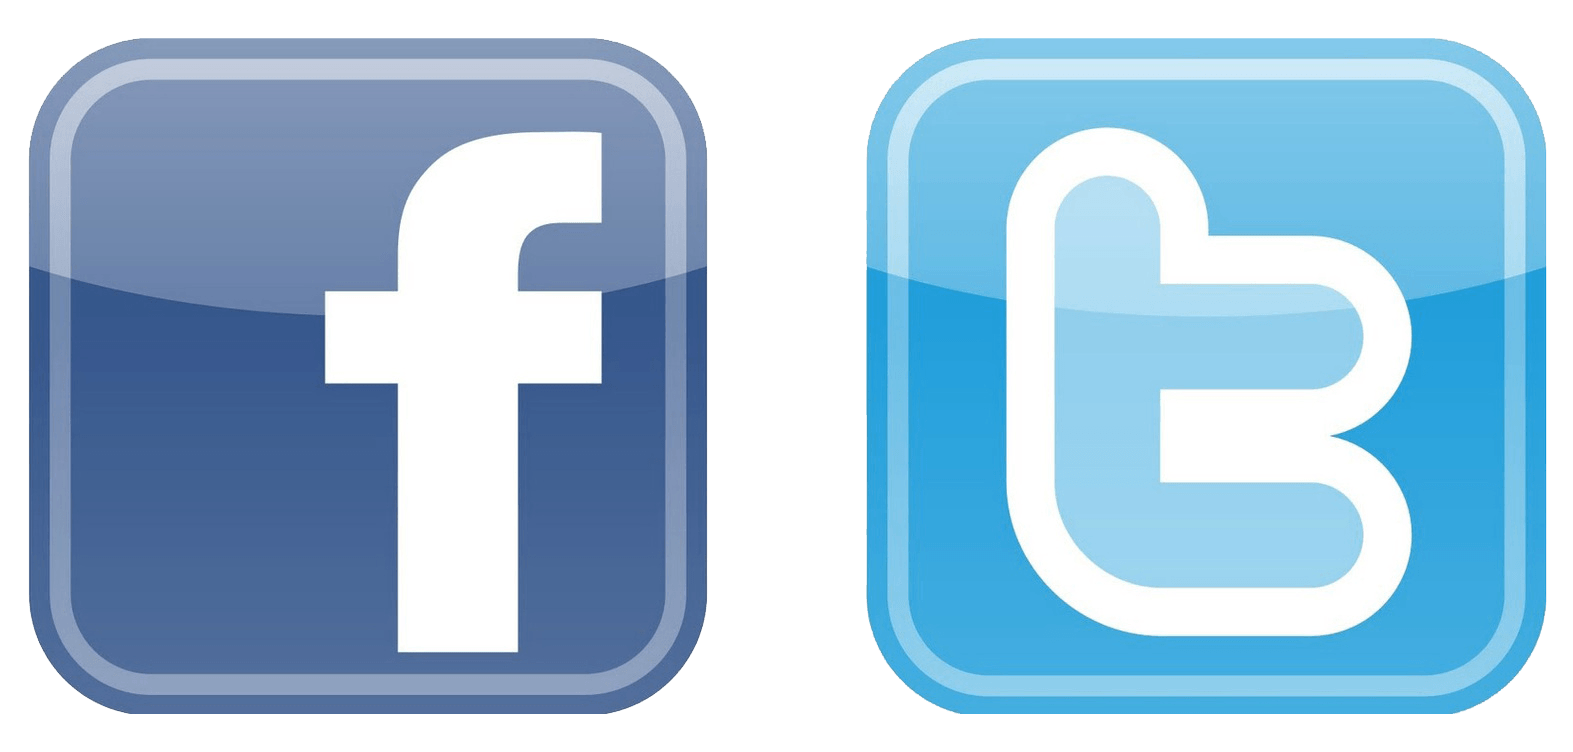 I Can Use Facebook Logo - Facebook logo clipart black and white download free